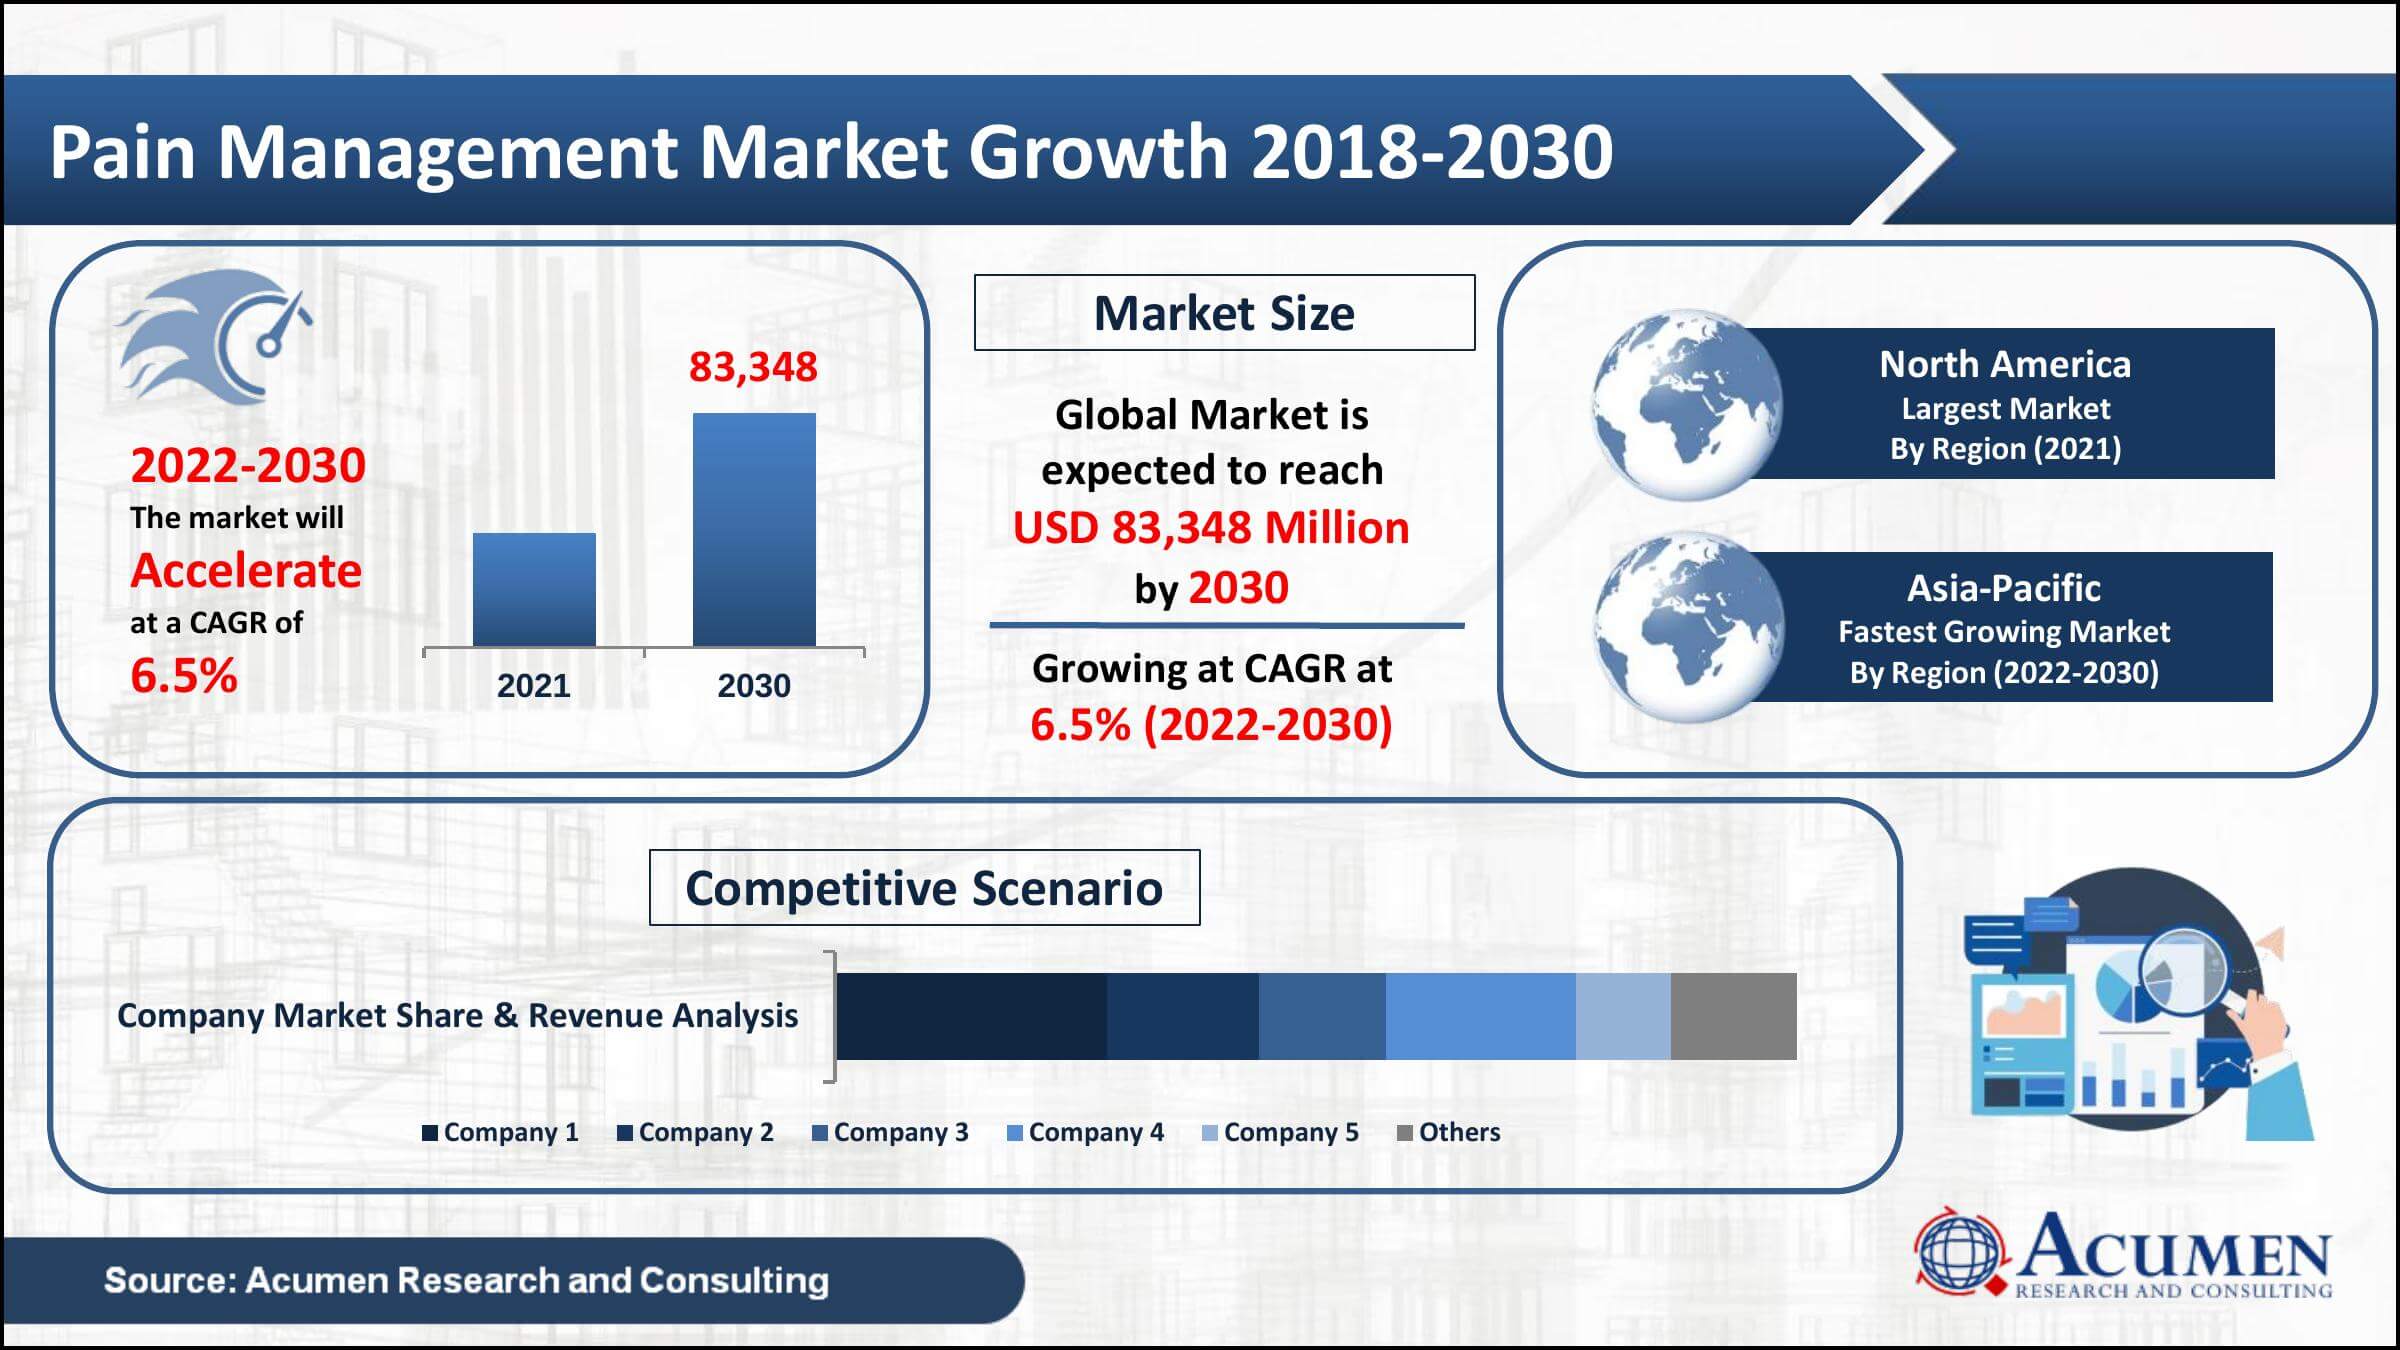 Global pain management market value was worth USD 48,518 Million in 2021, with a 6.5% CAGR from 2022 to 2030